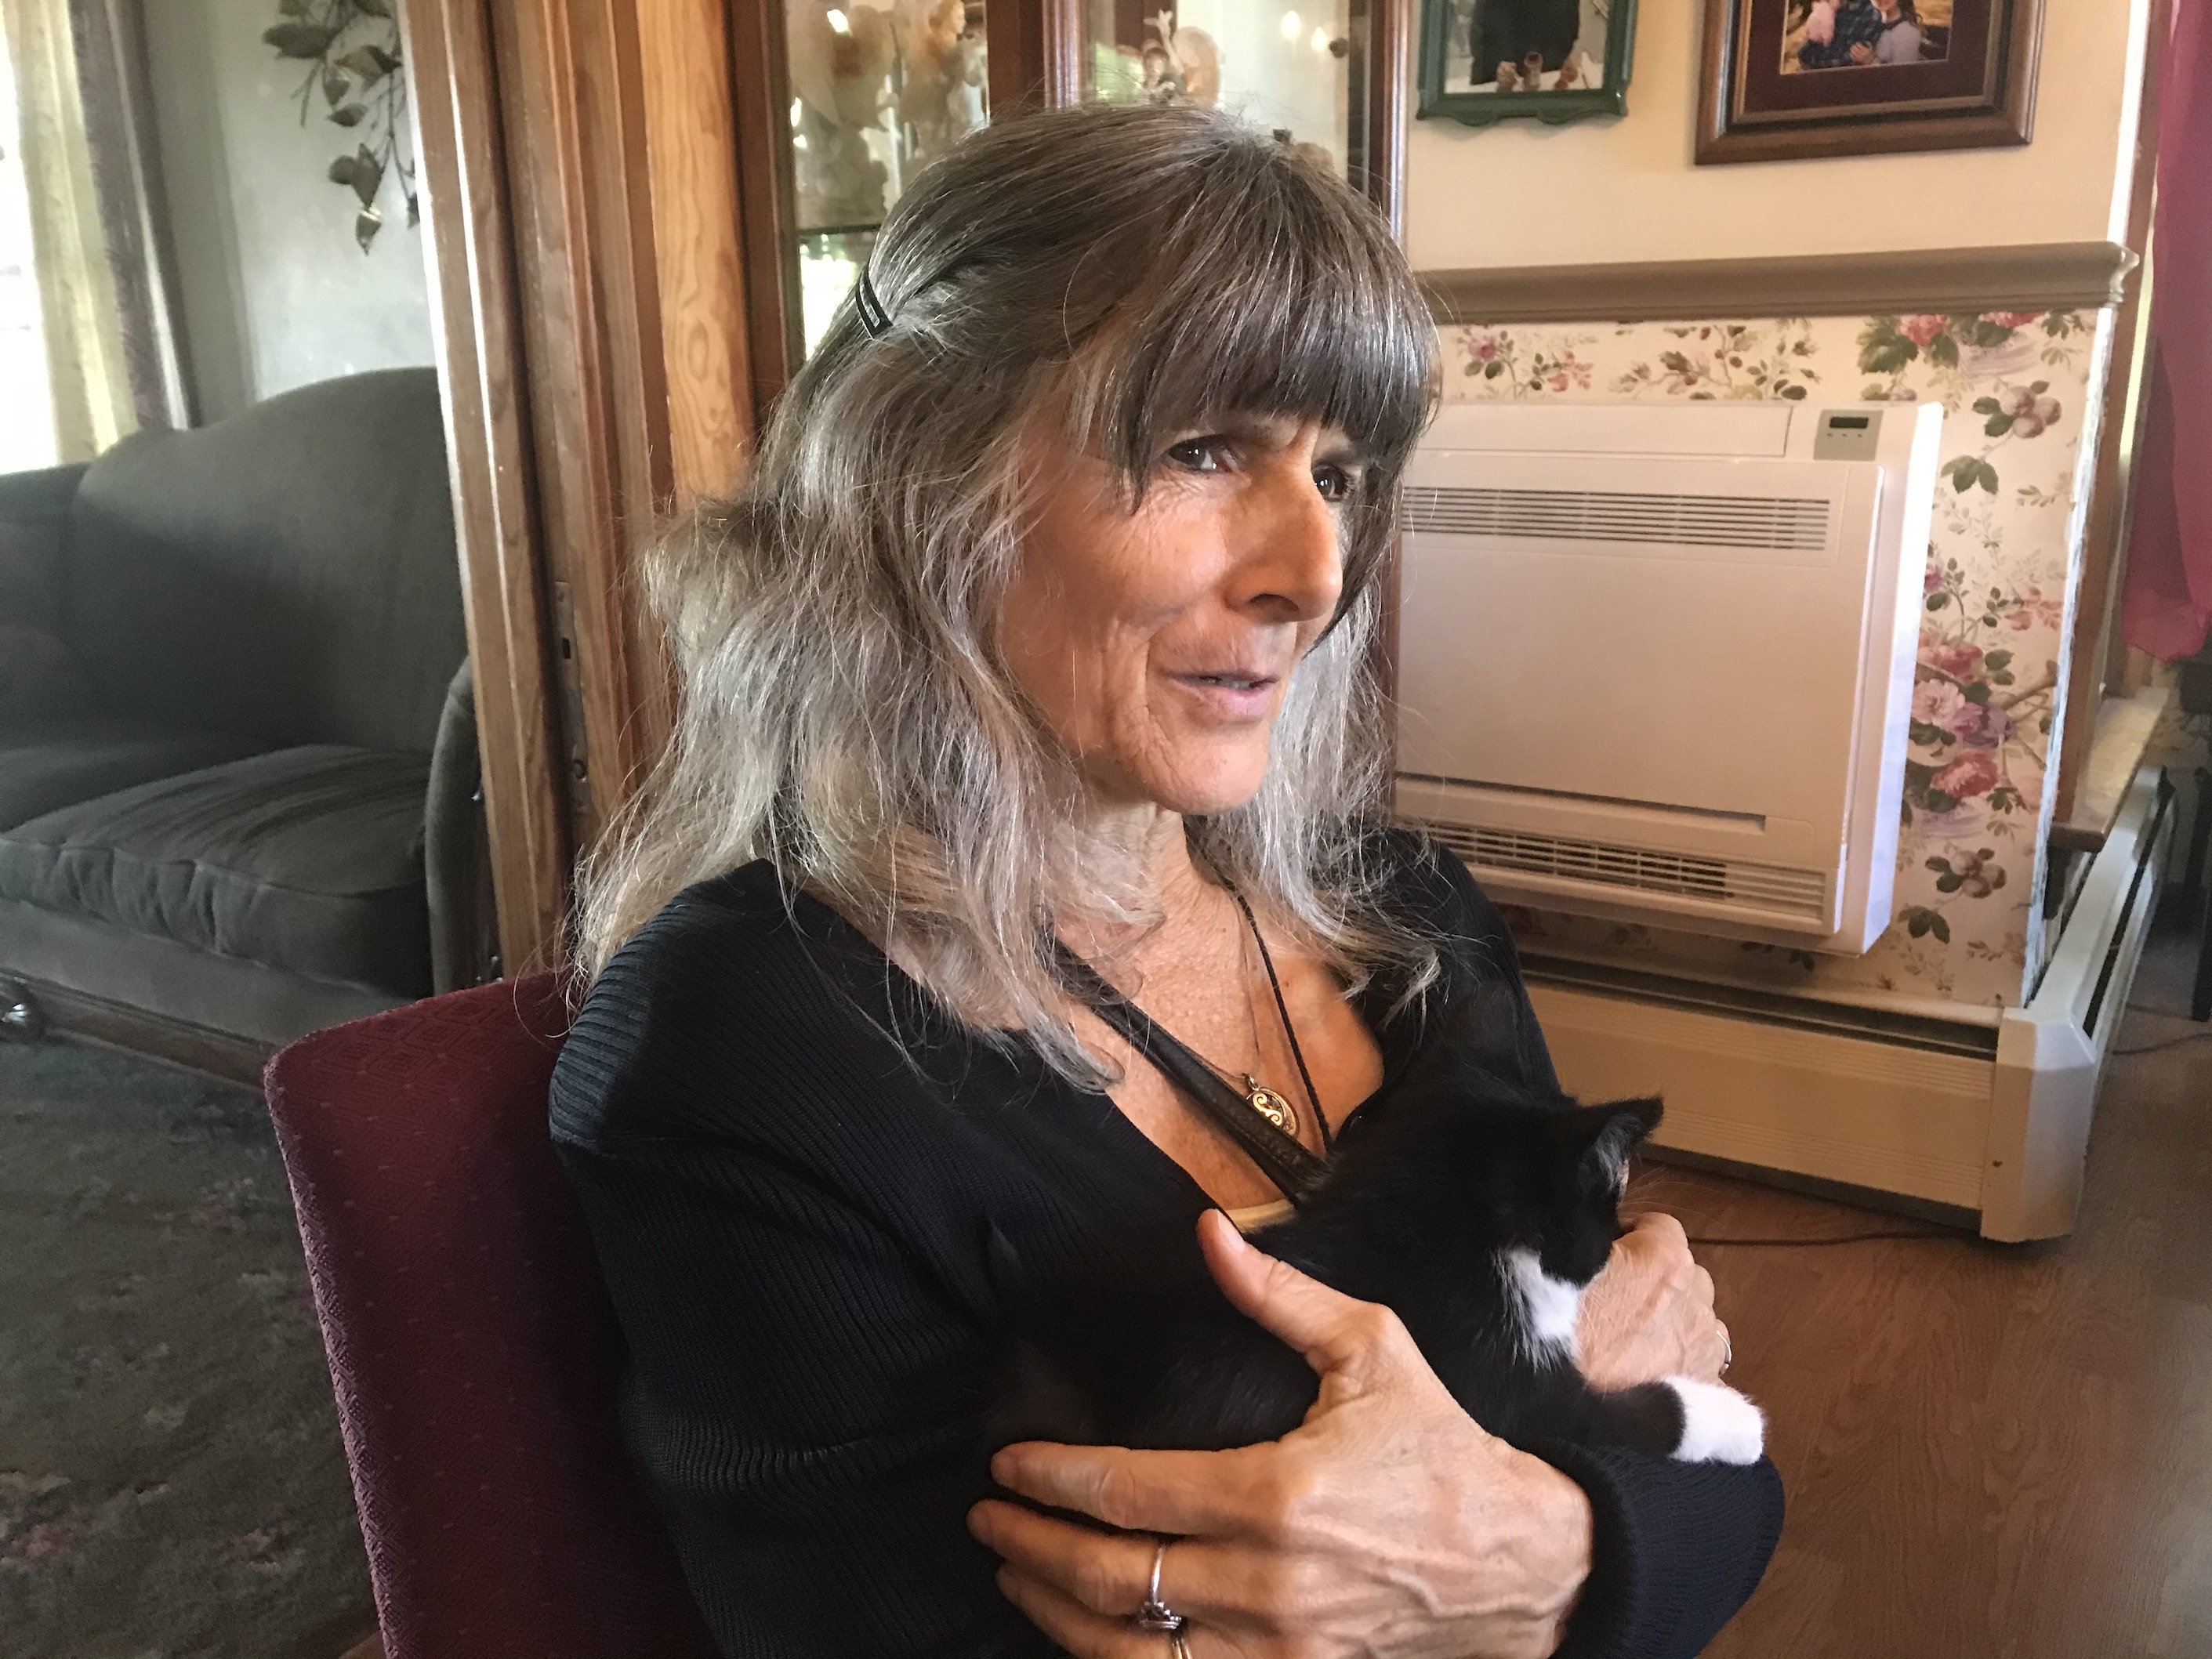 Me holding adorable black and white kitten at a family gathering